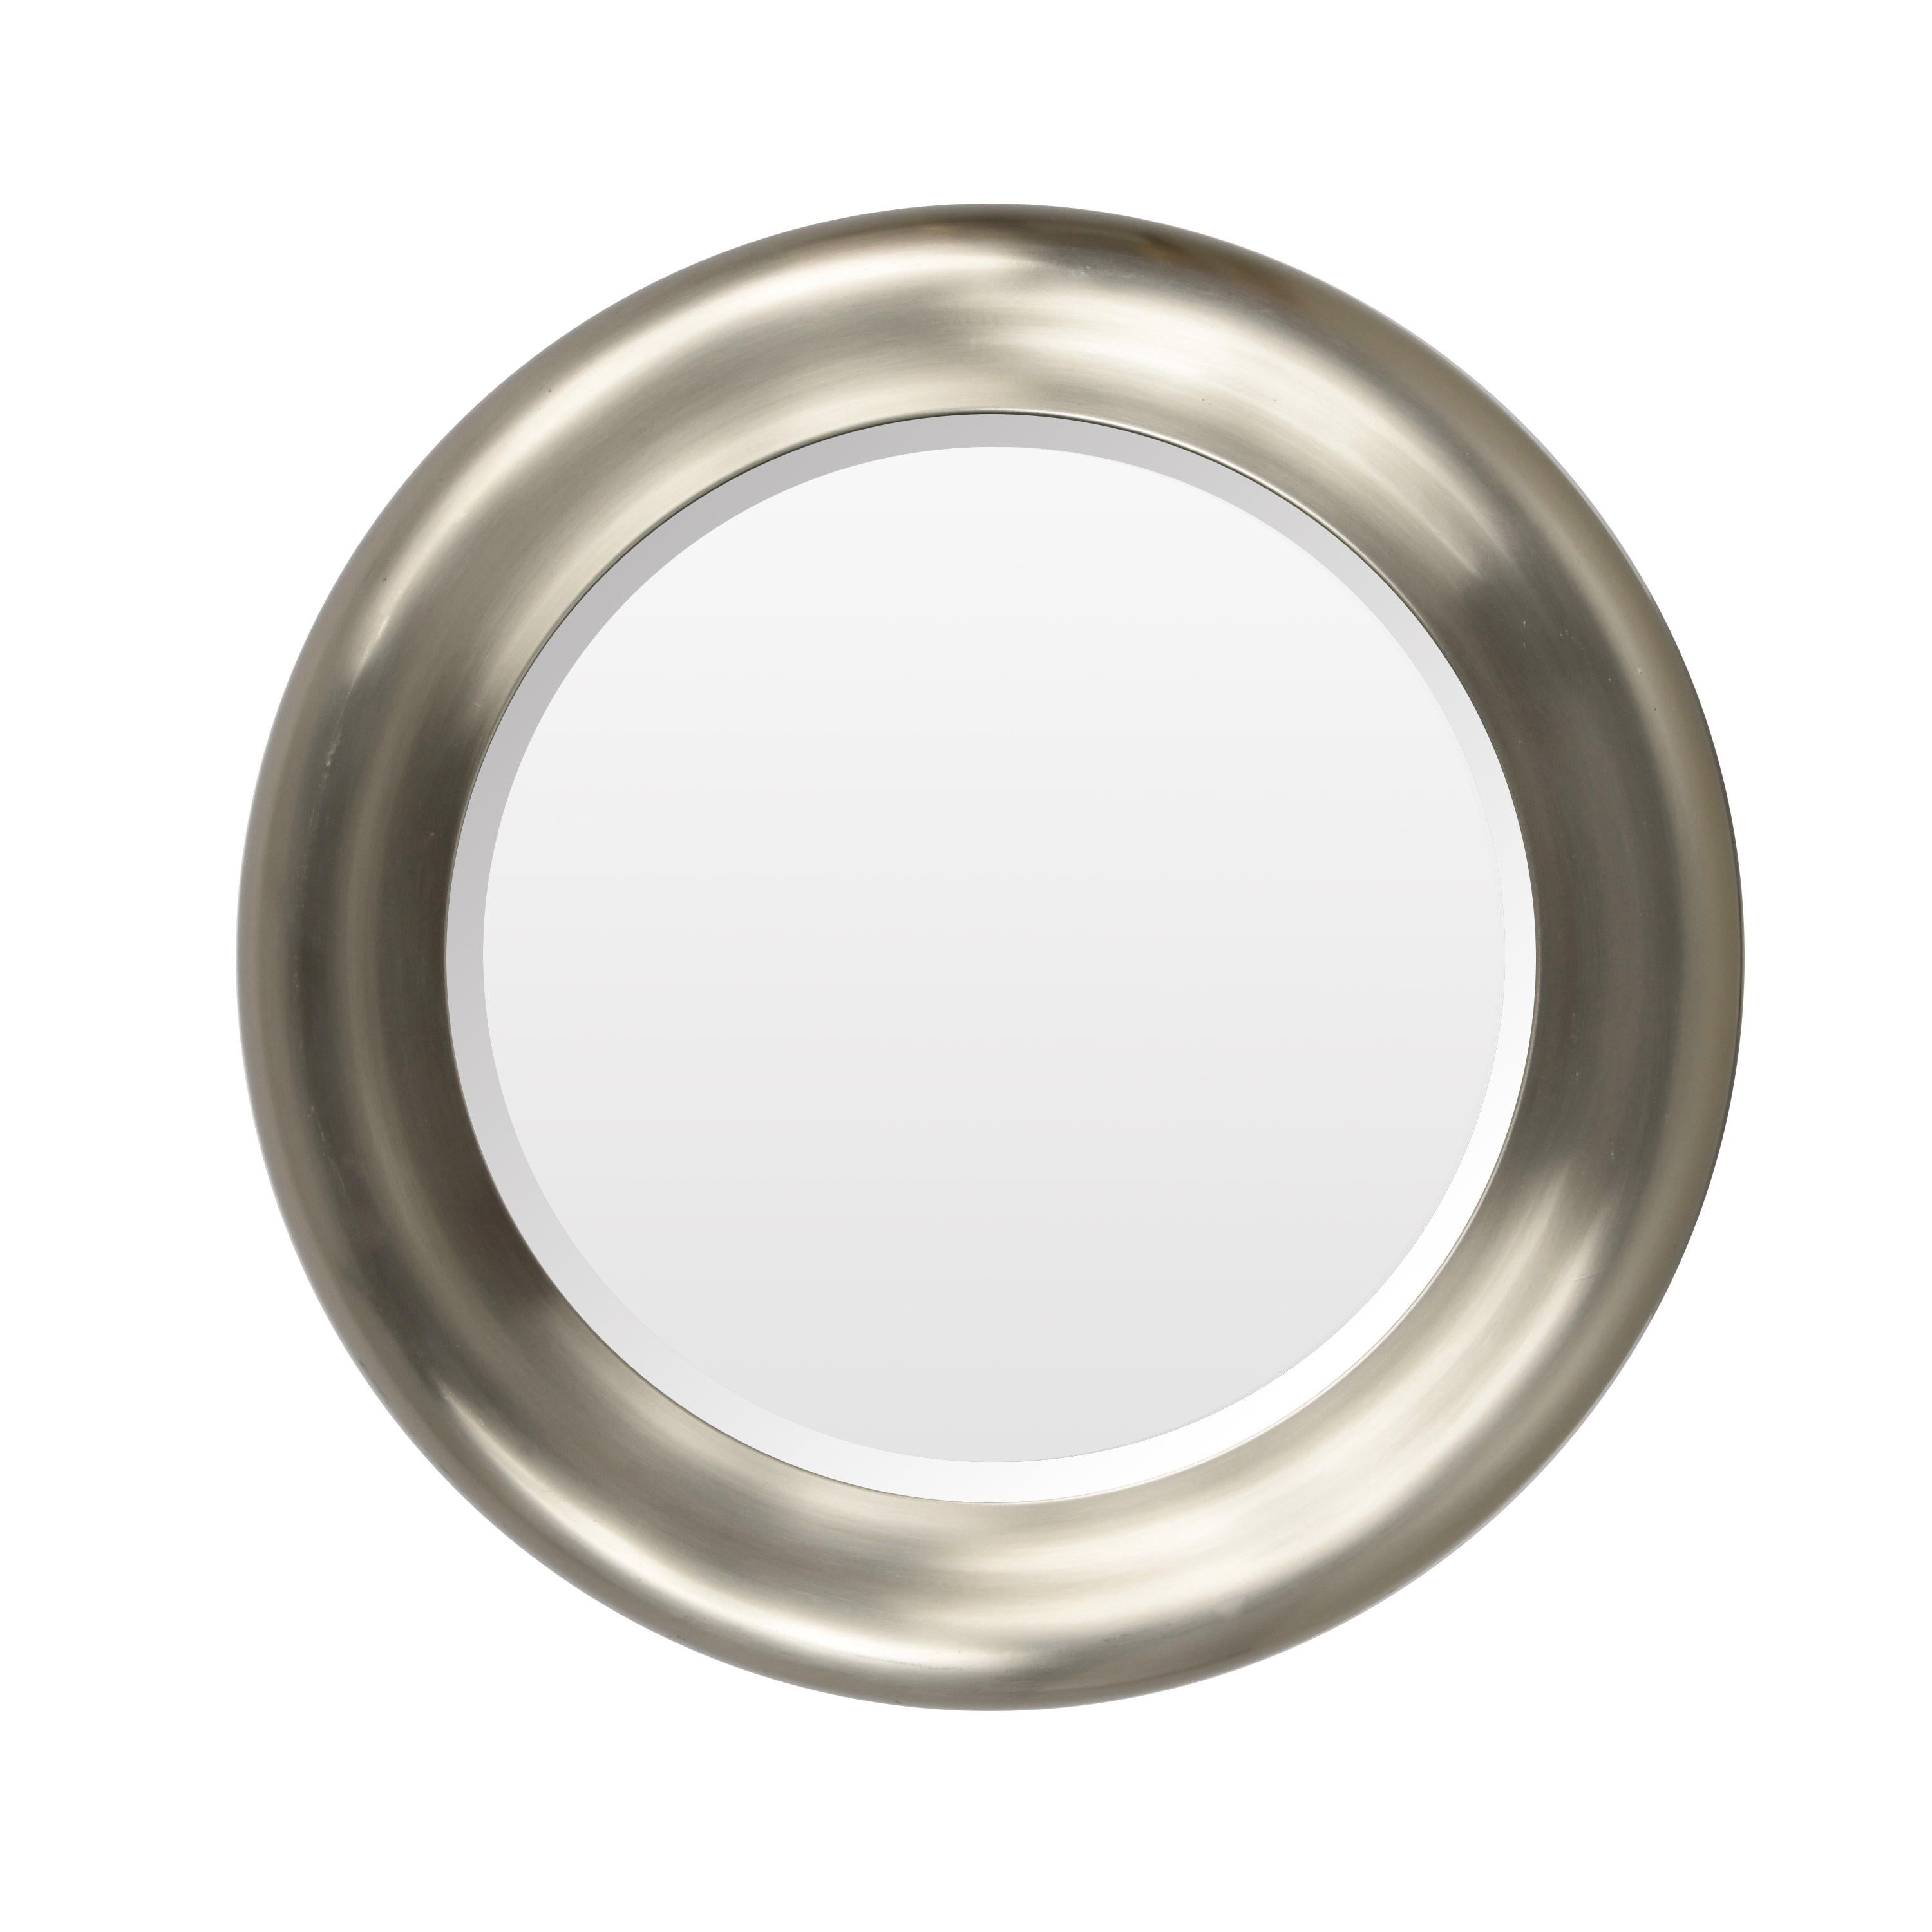 Midcentury Reggiani Italian Round Steel and Bevelled Wall Mirror, 1960s For Sale 12